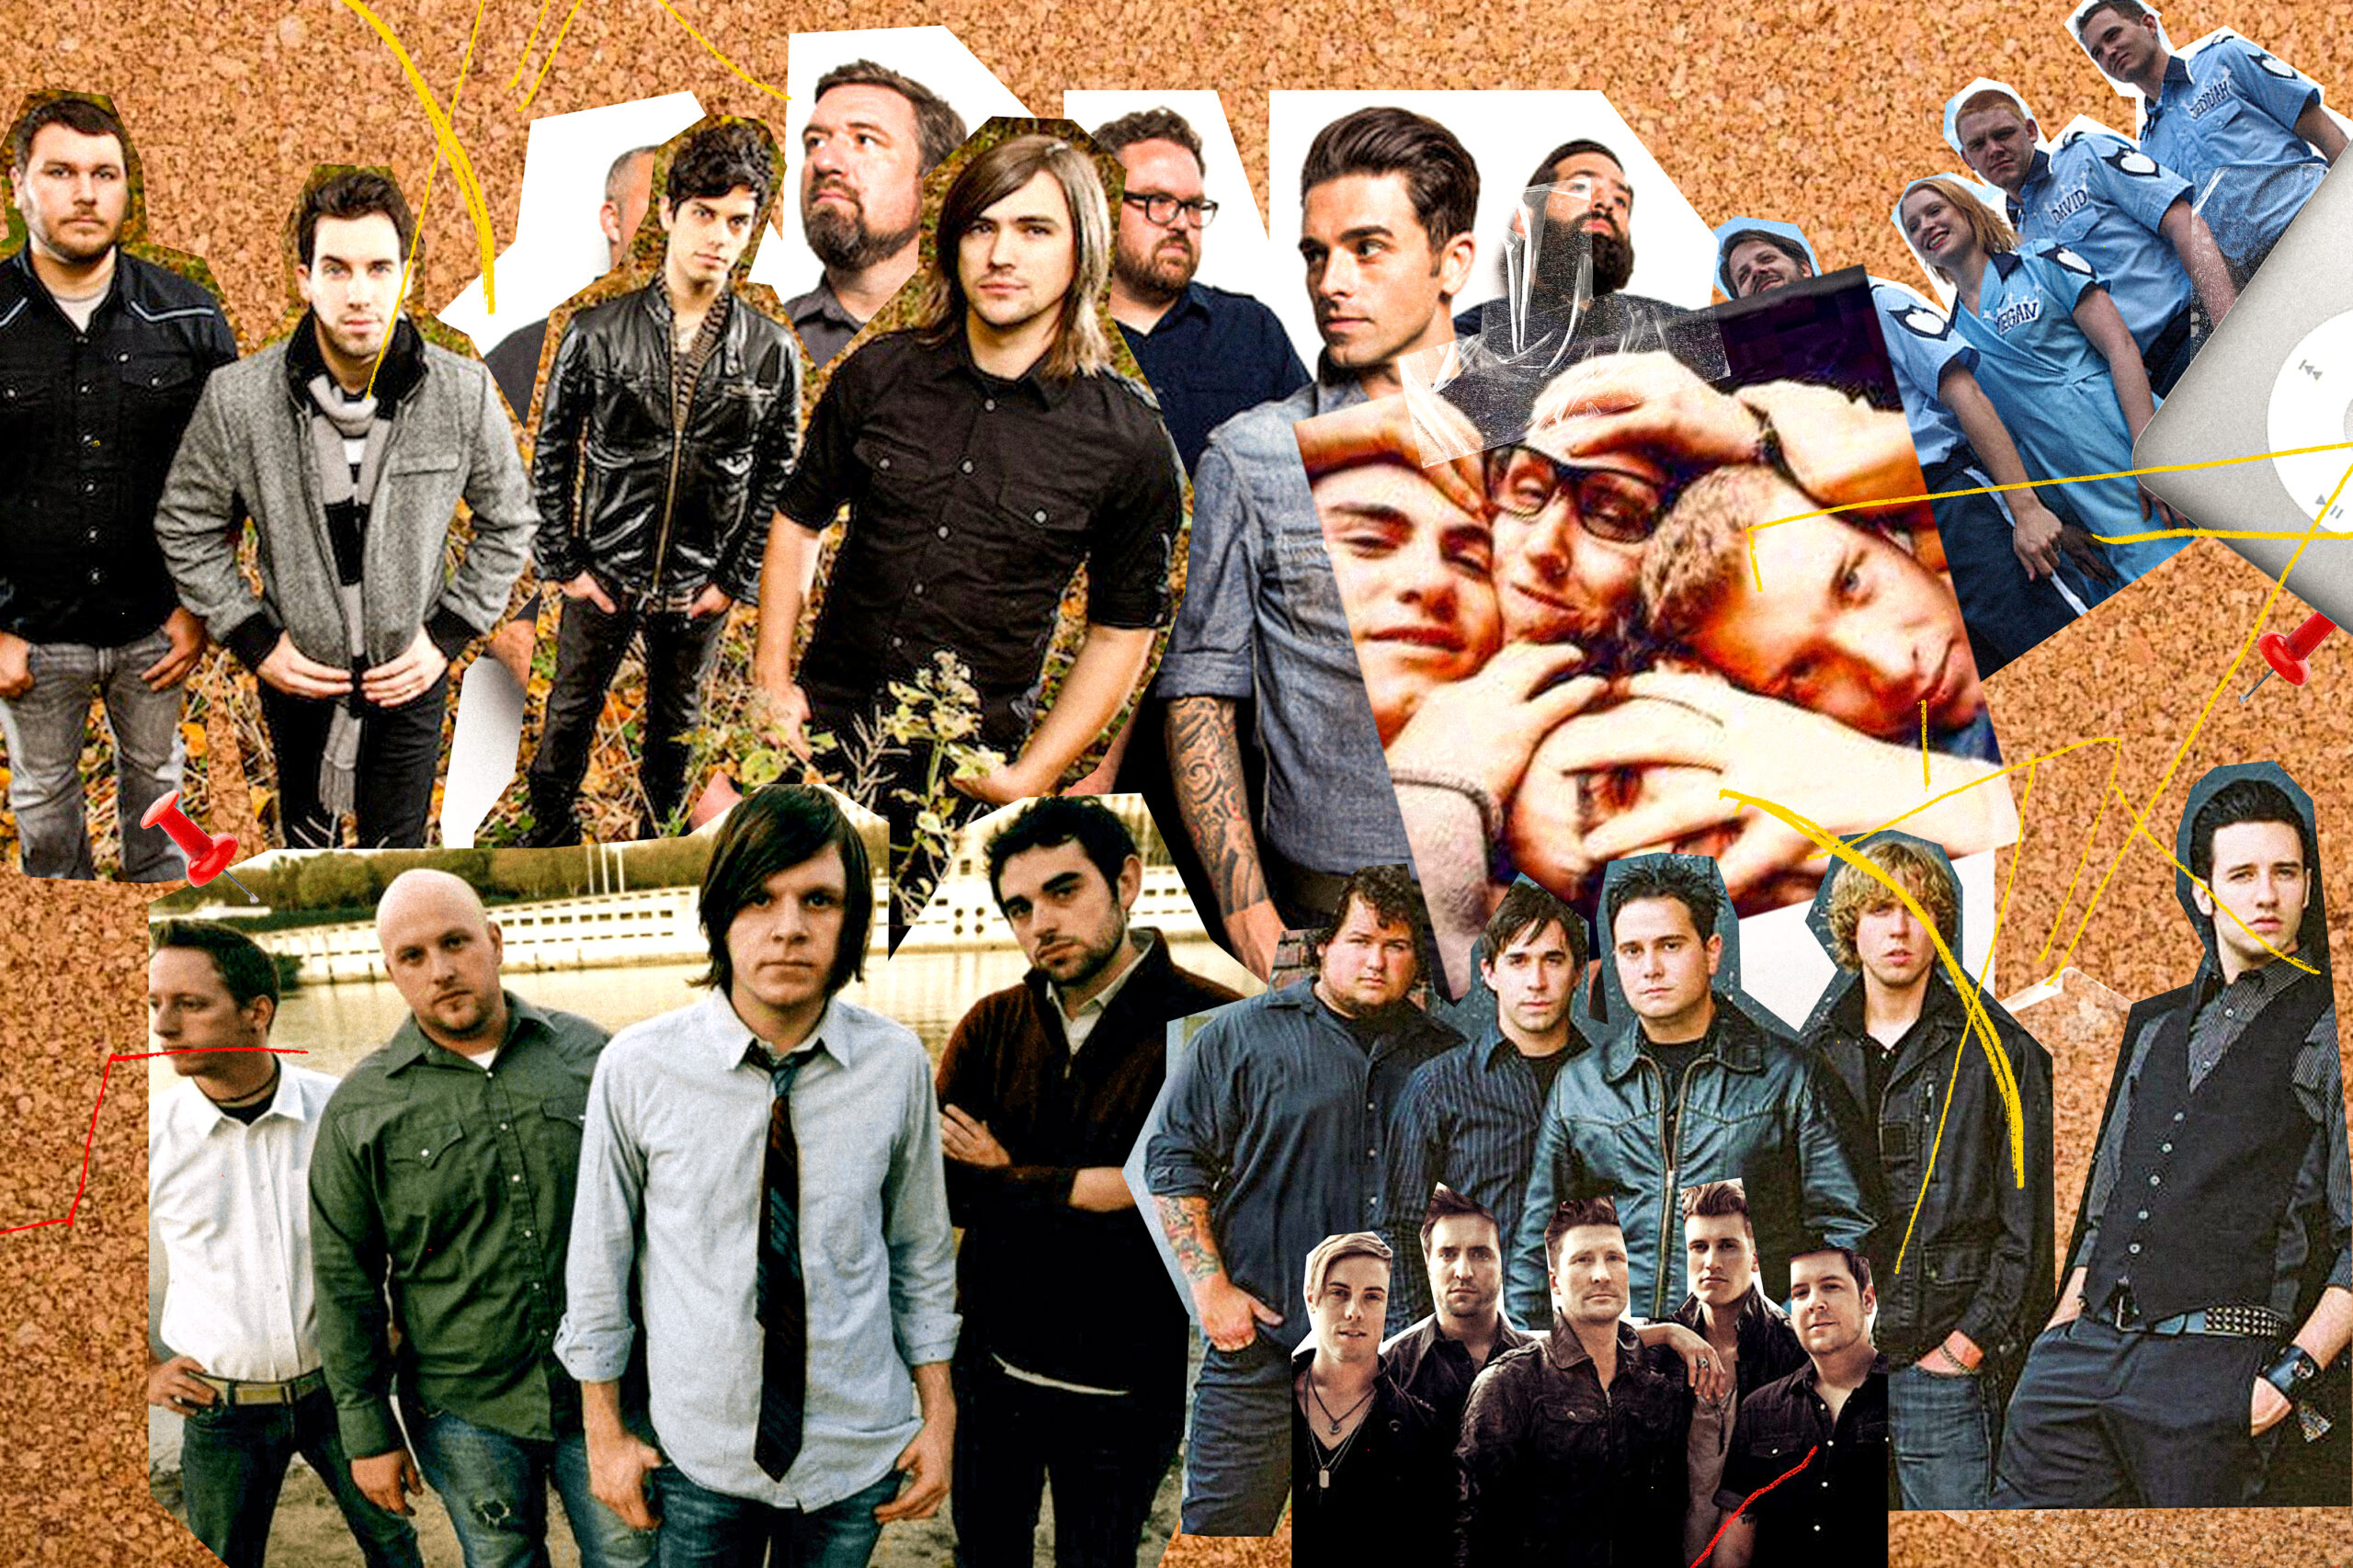 The Definitive Ranking of Early 2000s Christian Indie Rock Bands - RELEVANT